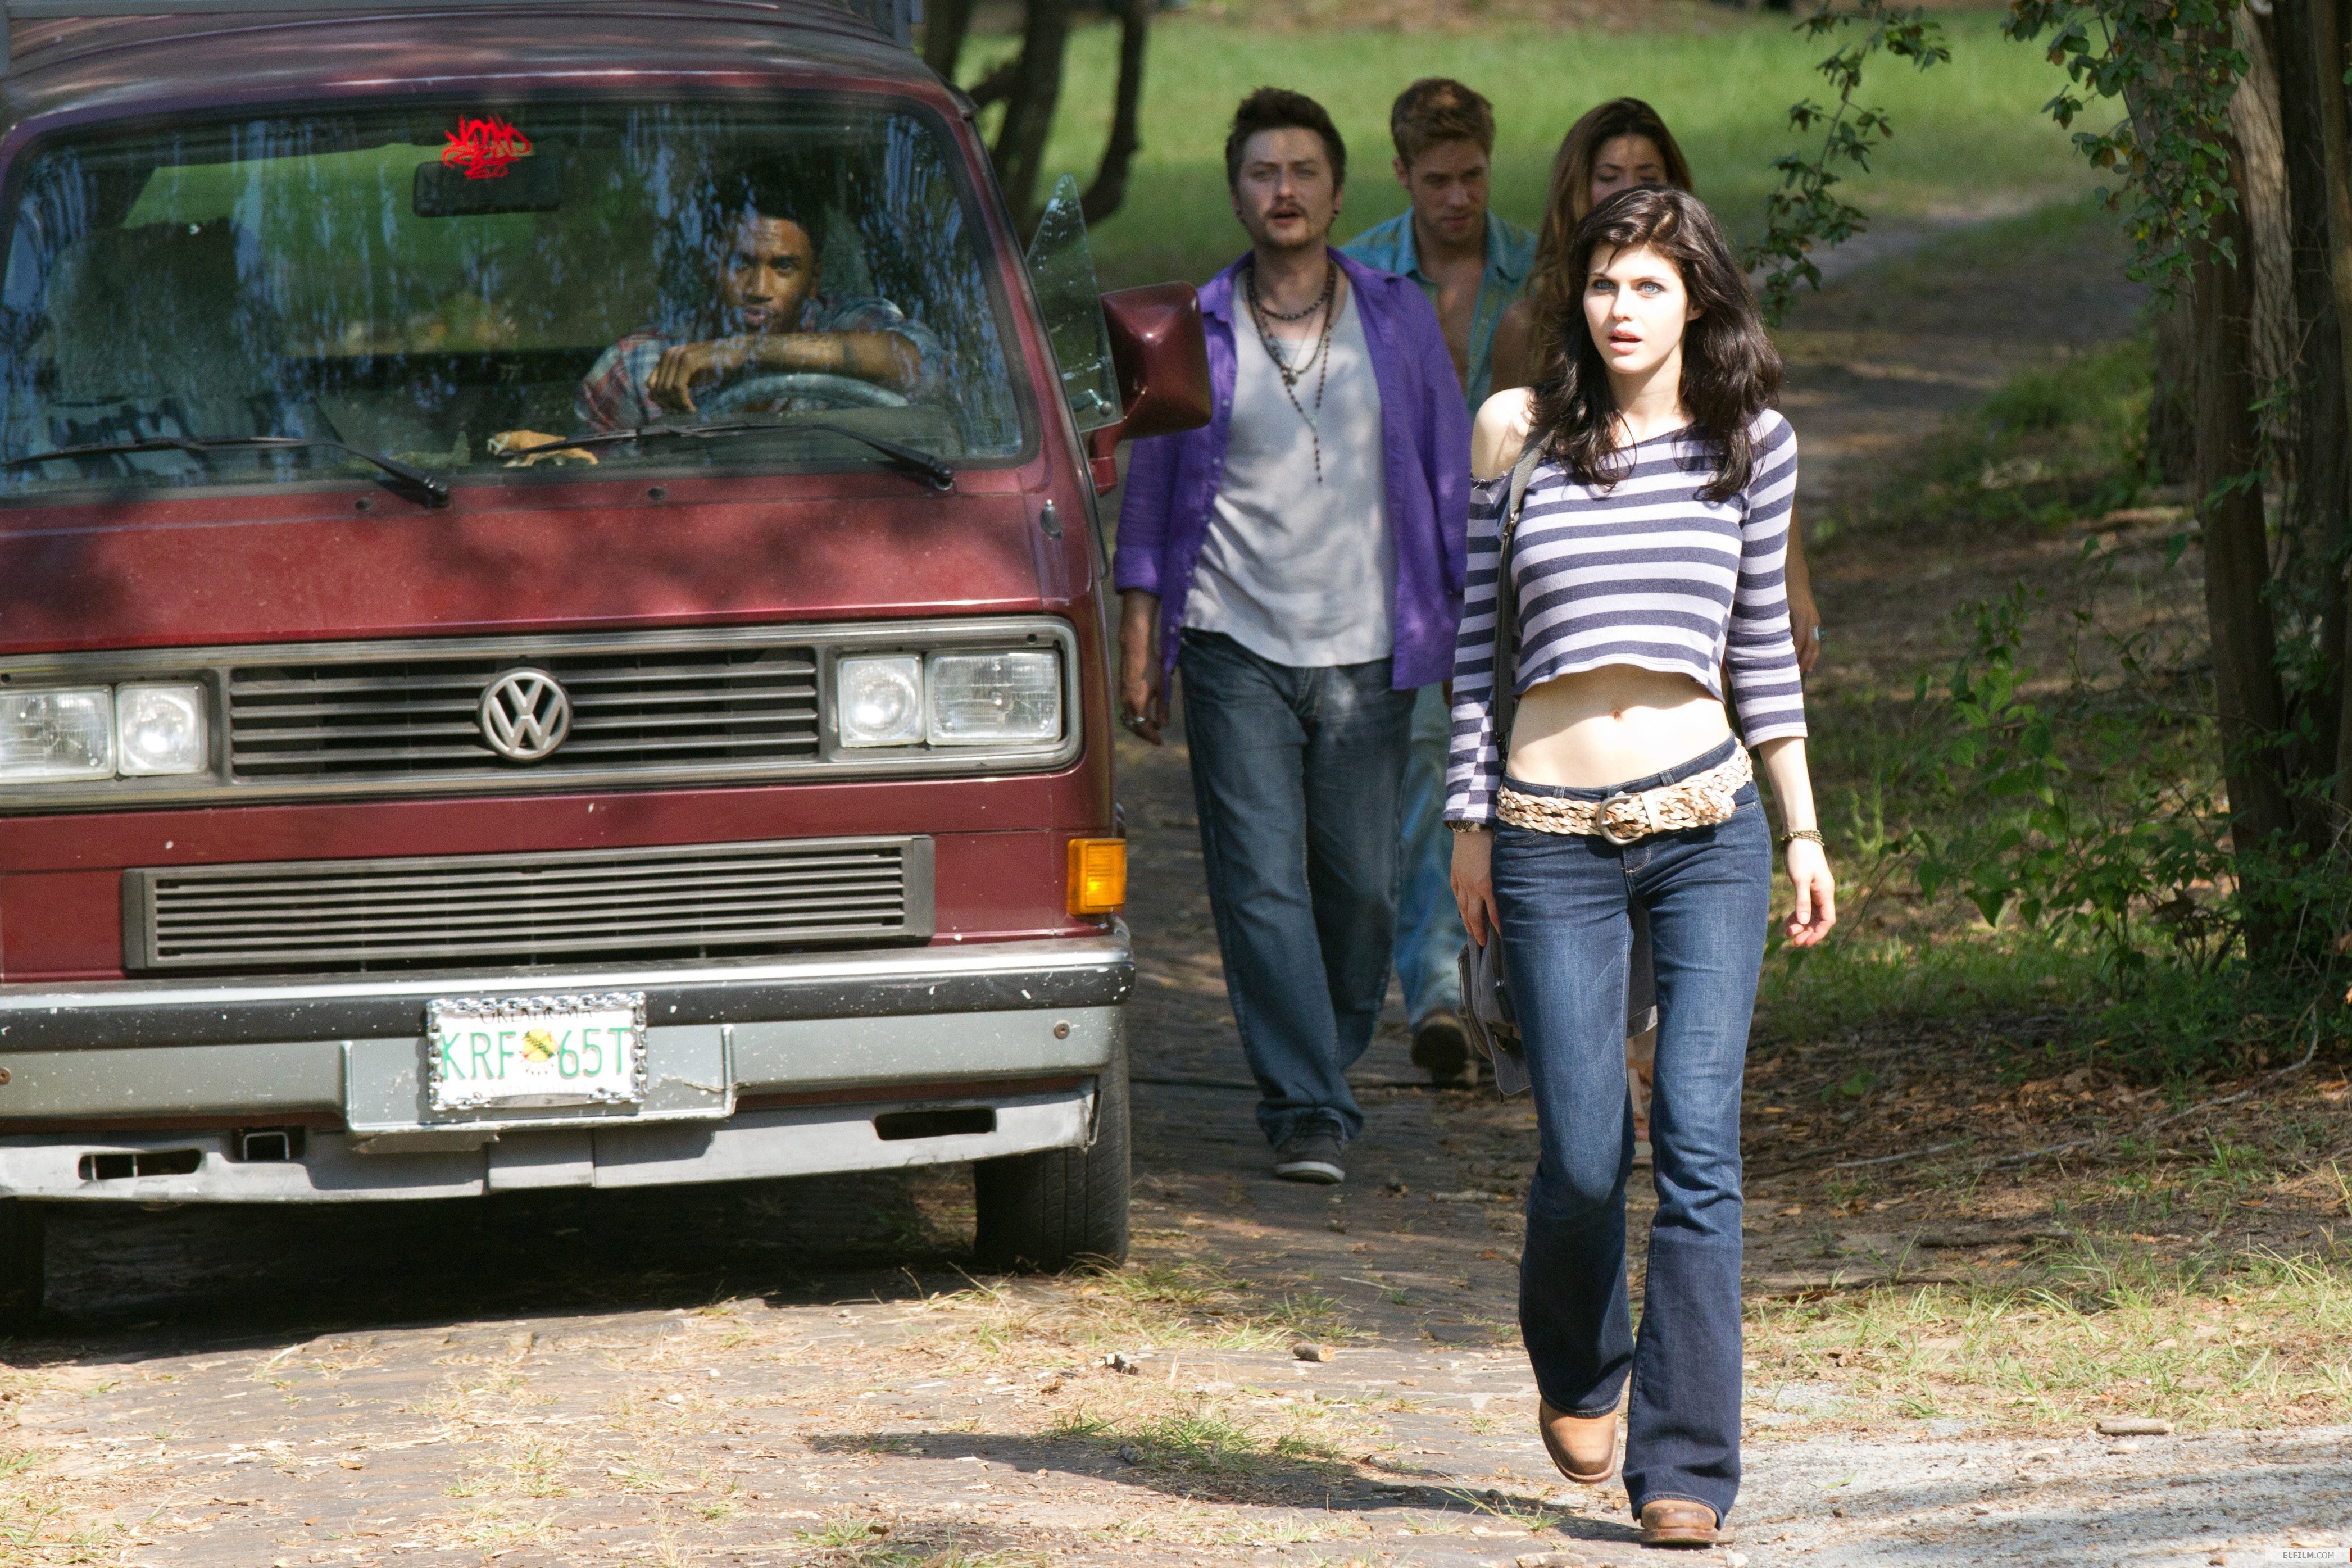 Movie Texas Chainsaw 3D HD Wallpaper | Background Image